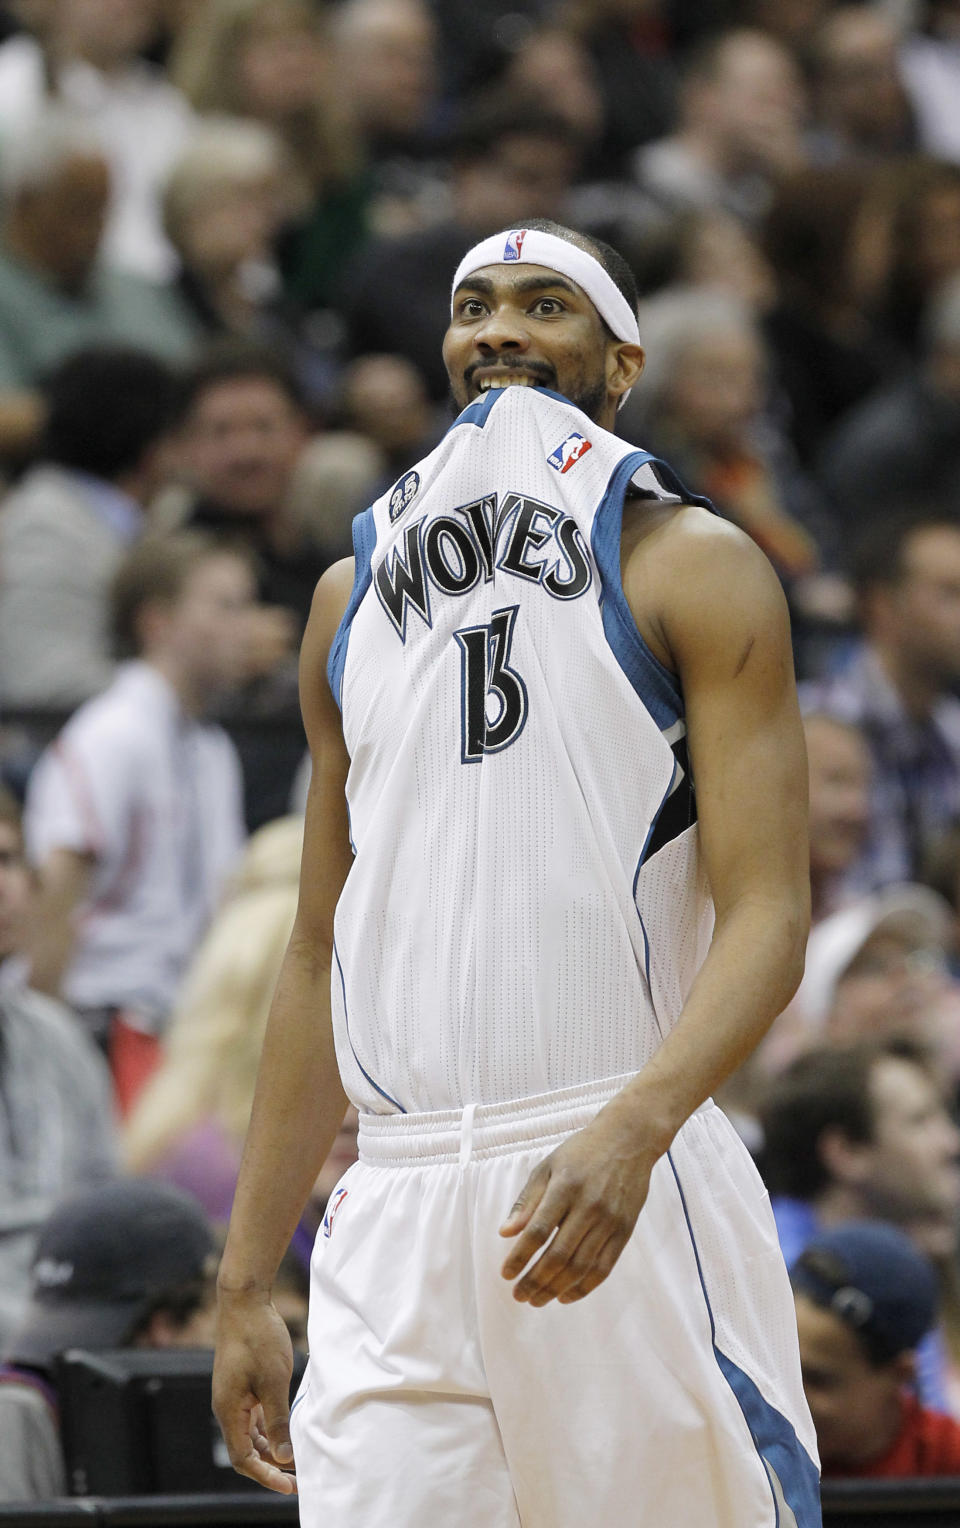 Minnesota Timberwolves forward Corey Brewer walks downcourt as a teammate shoots a free throw during the second quarter of an NBA basketball game against the Houston Rockets in Minneapolis, Friday, April 11, 2014. (AP Photo/Ann Heisenfelt)